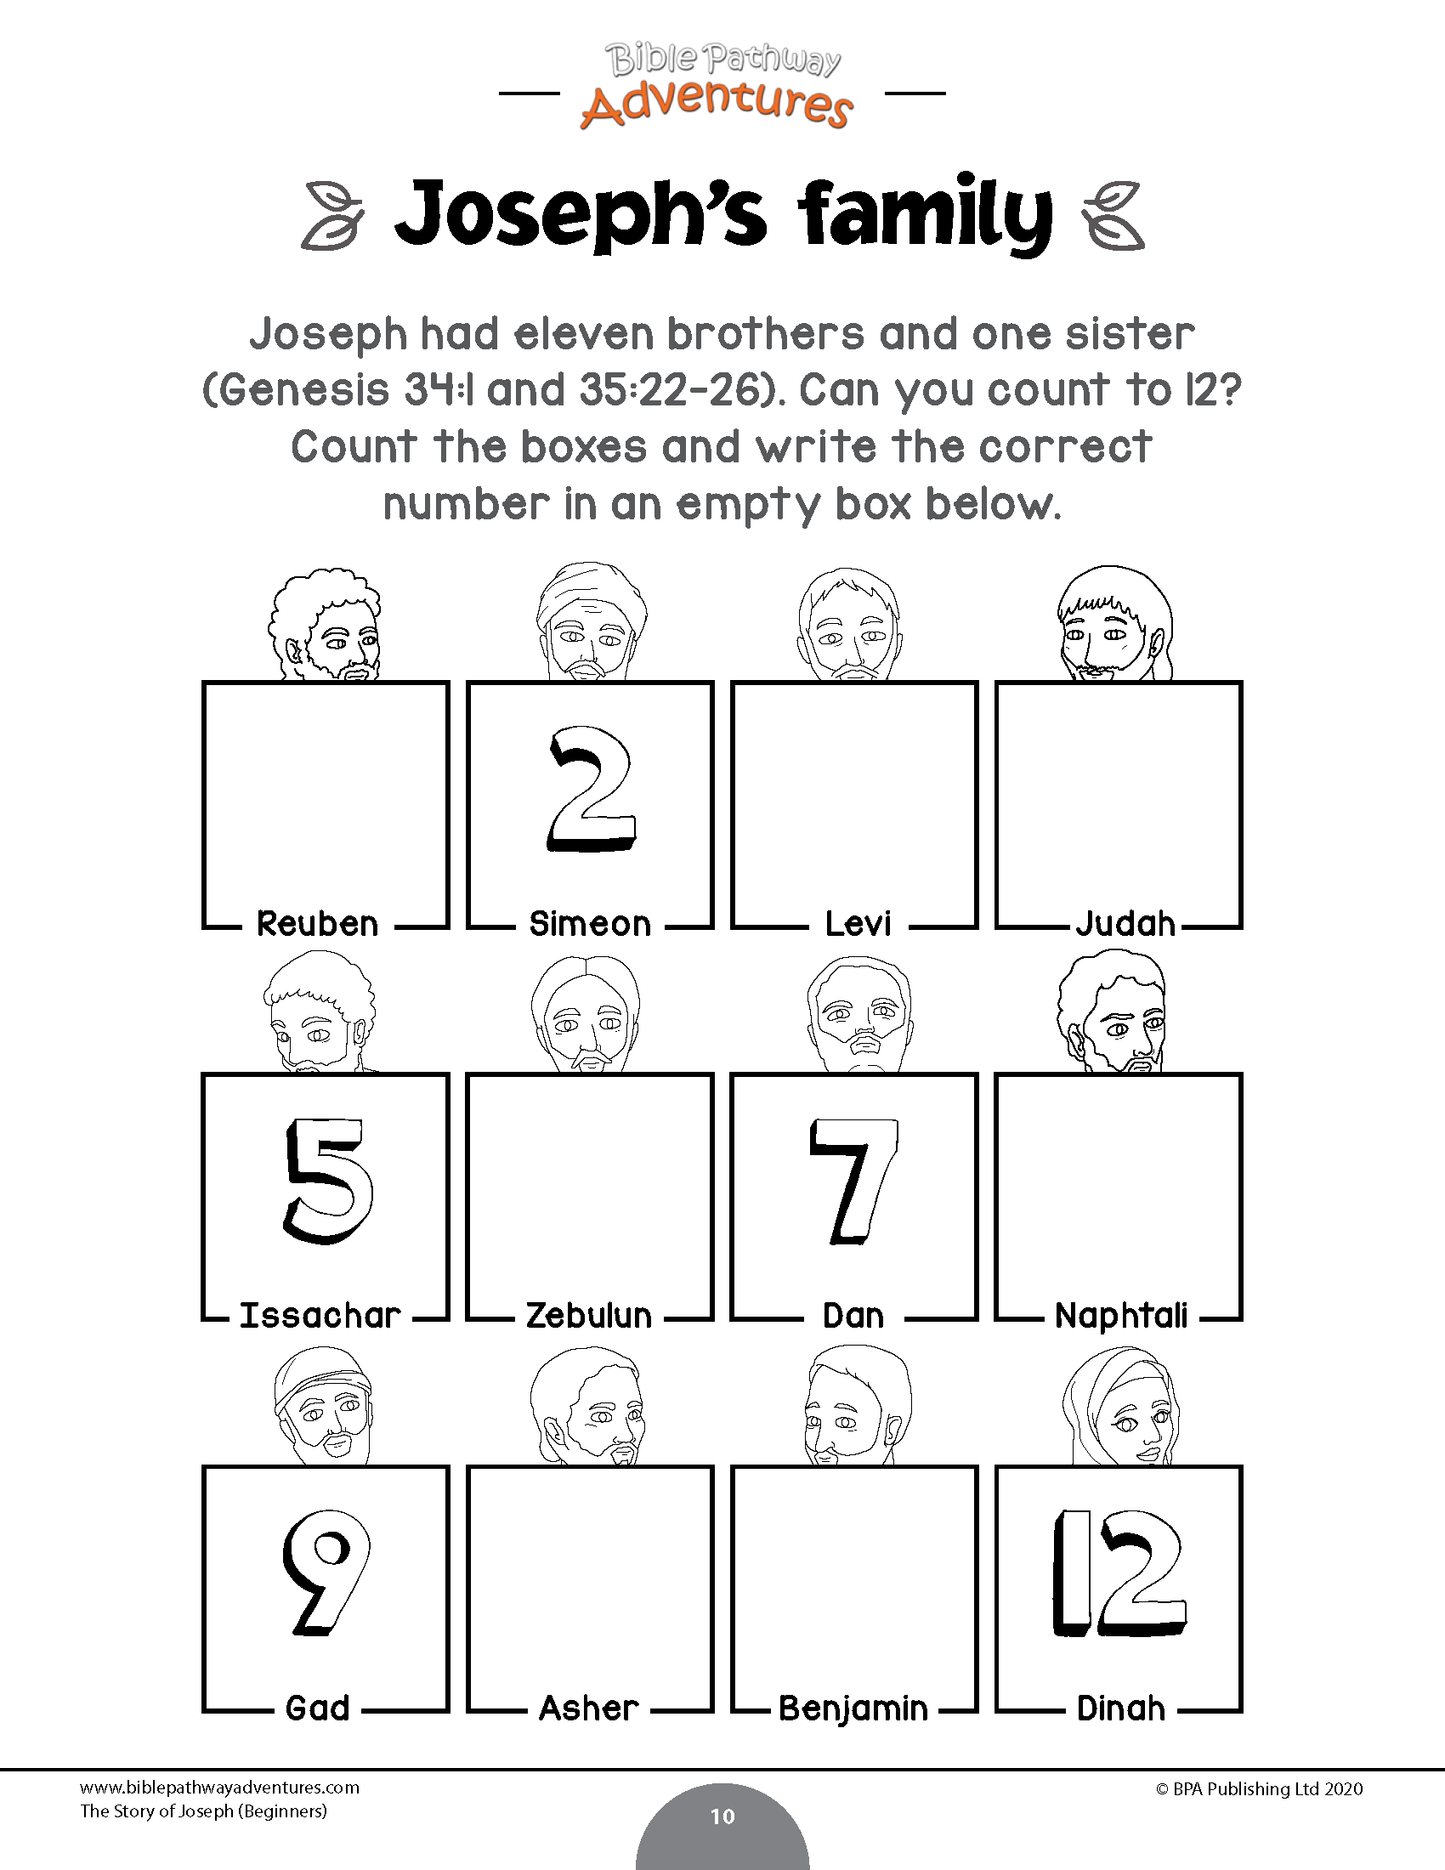 The story of Joseph Activity Book for Beginners